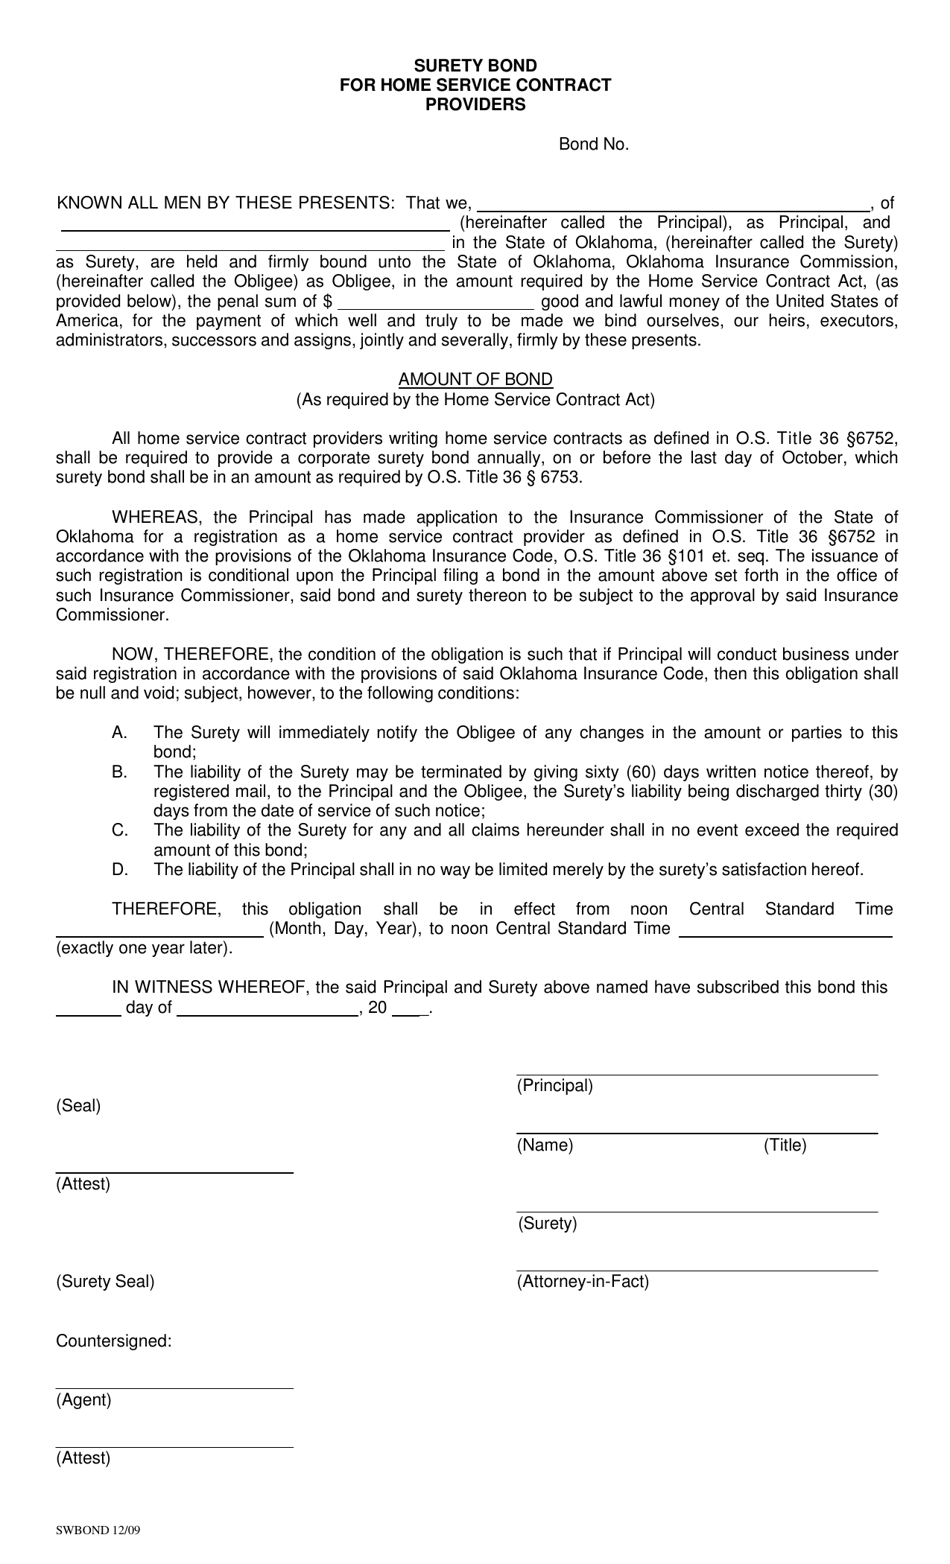 Surety Bond for Home Service Contract Providers - Oklahoma, Page 1